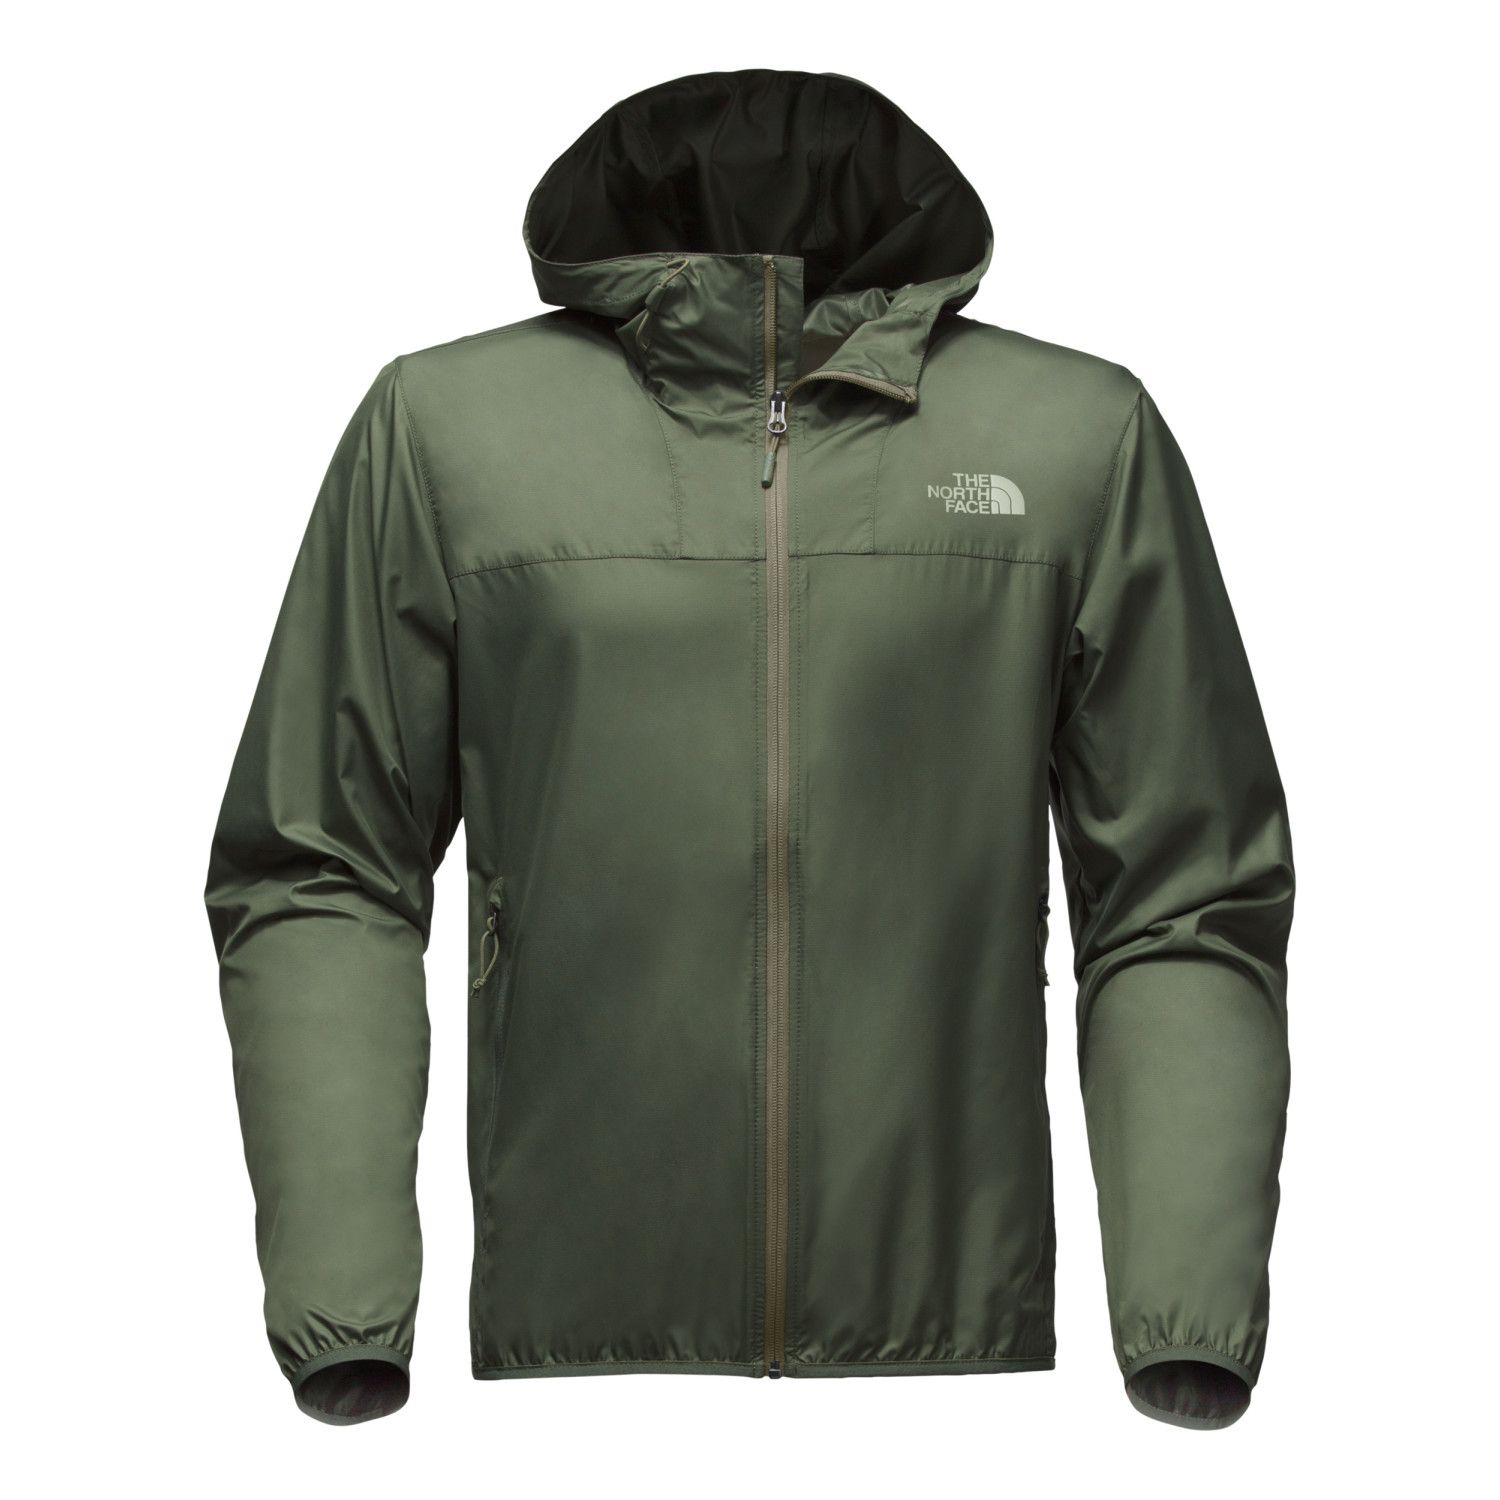 cyclone 2 hoodie north face